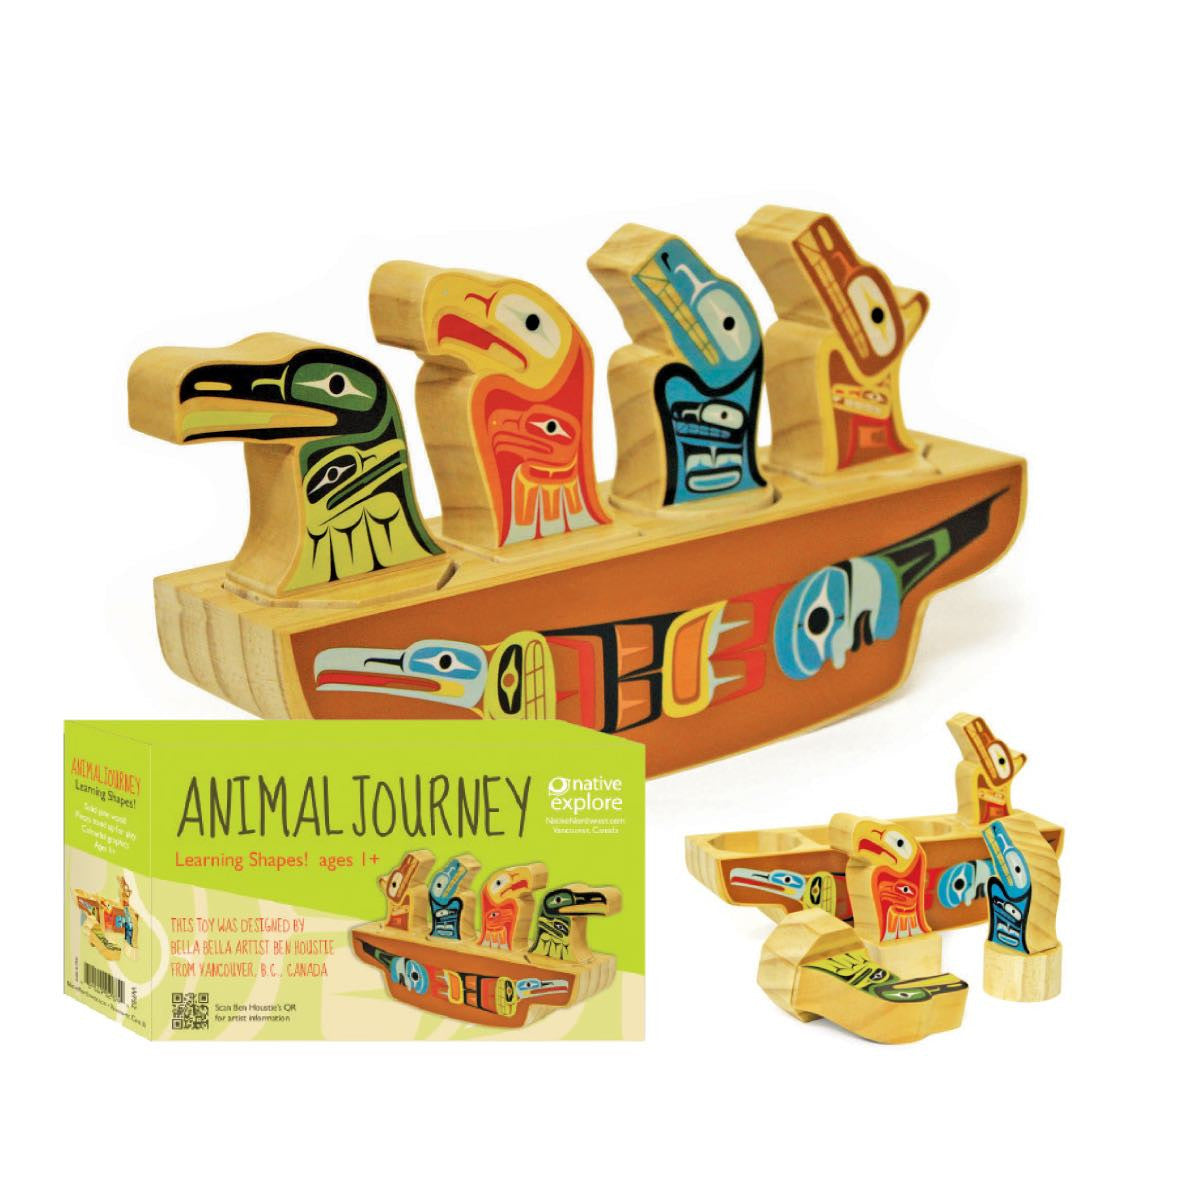 Learning Shapes - "Animal Journey" by Ben Houstie